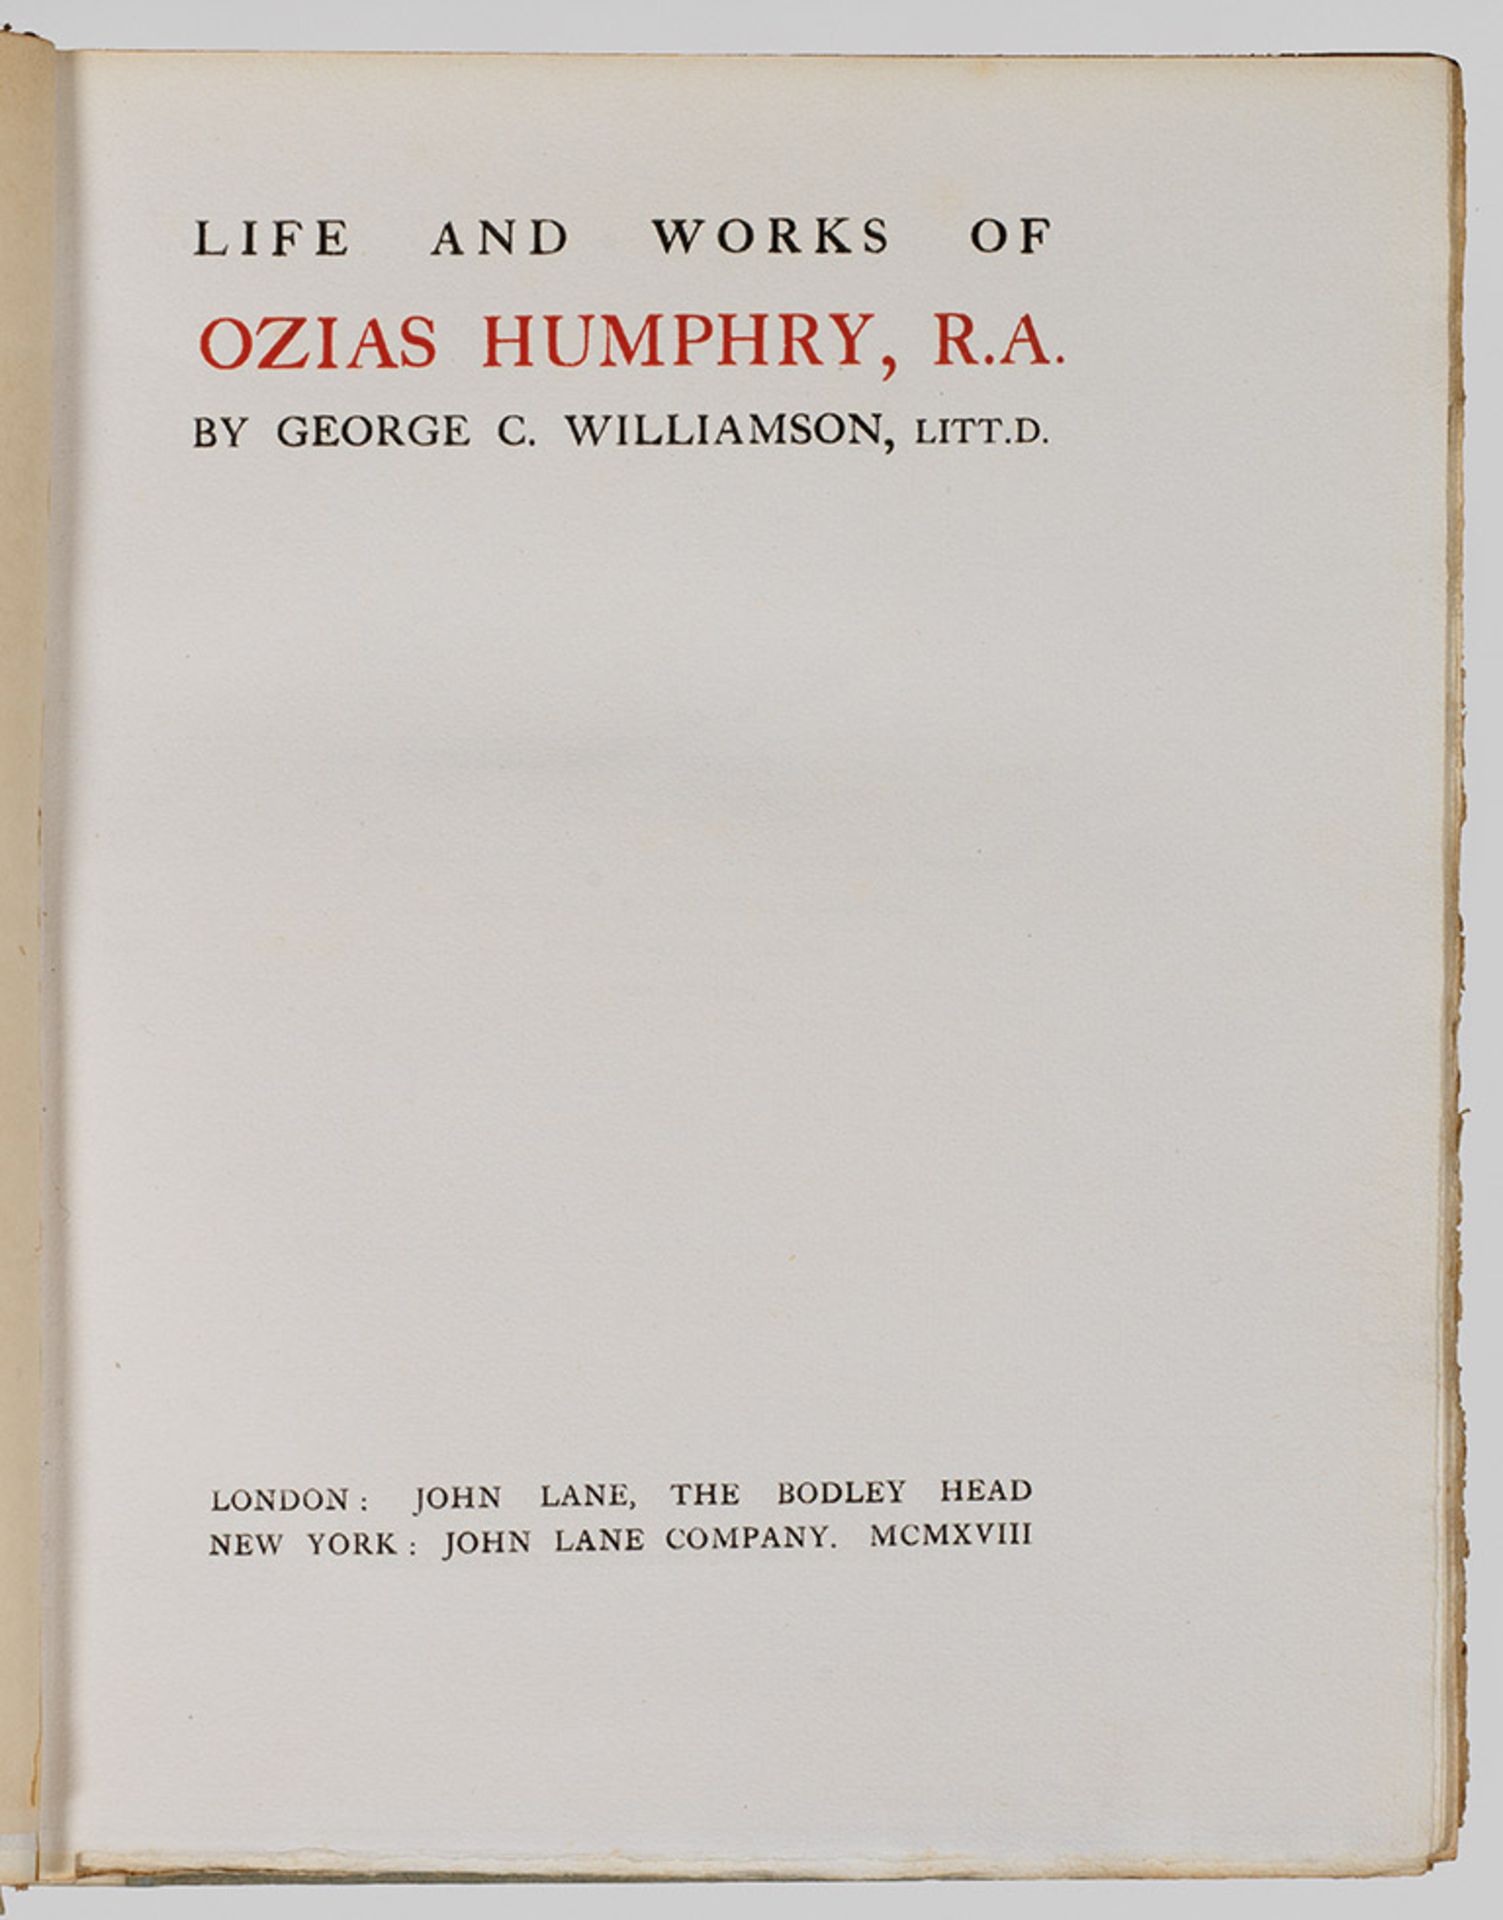 George C. Williamson Litt. D.: "Life and Works of